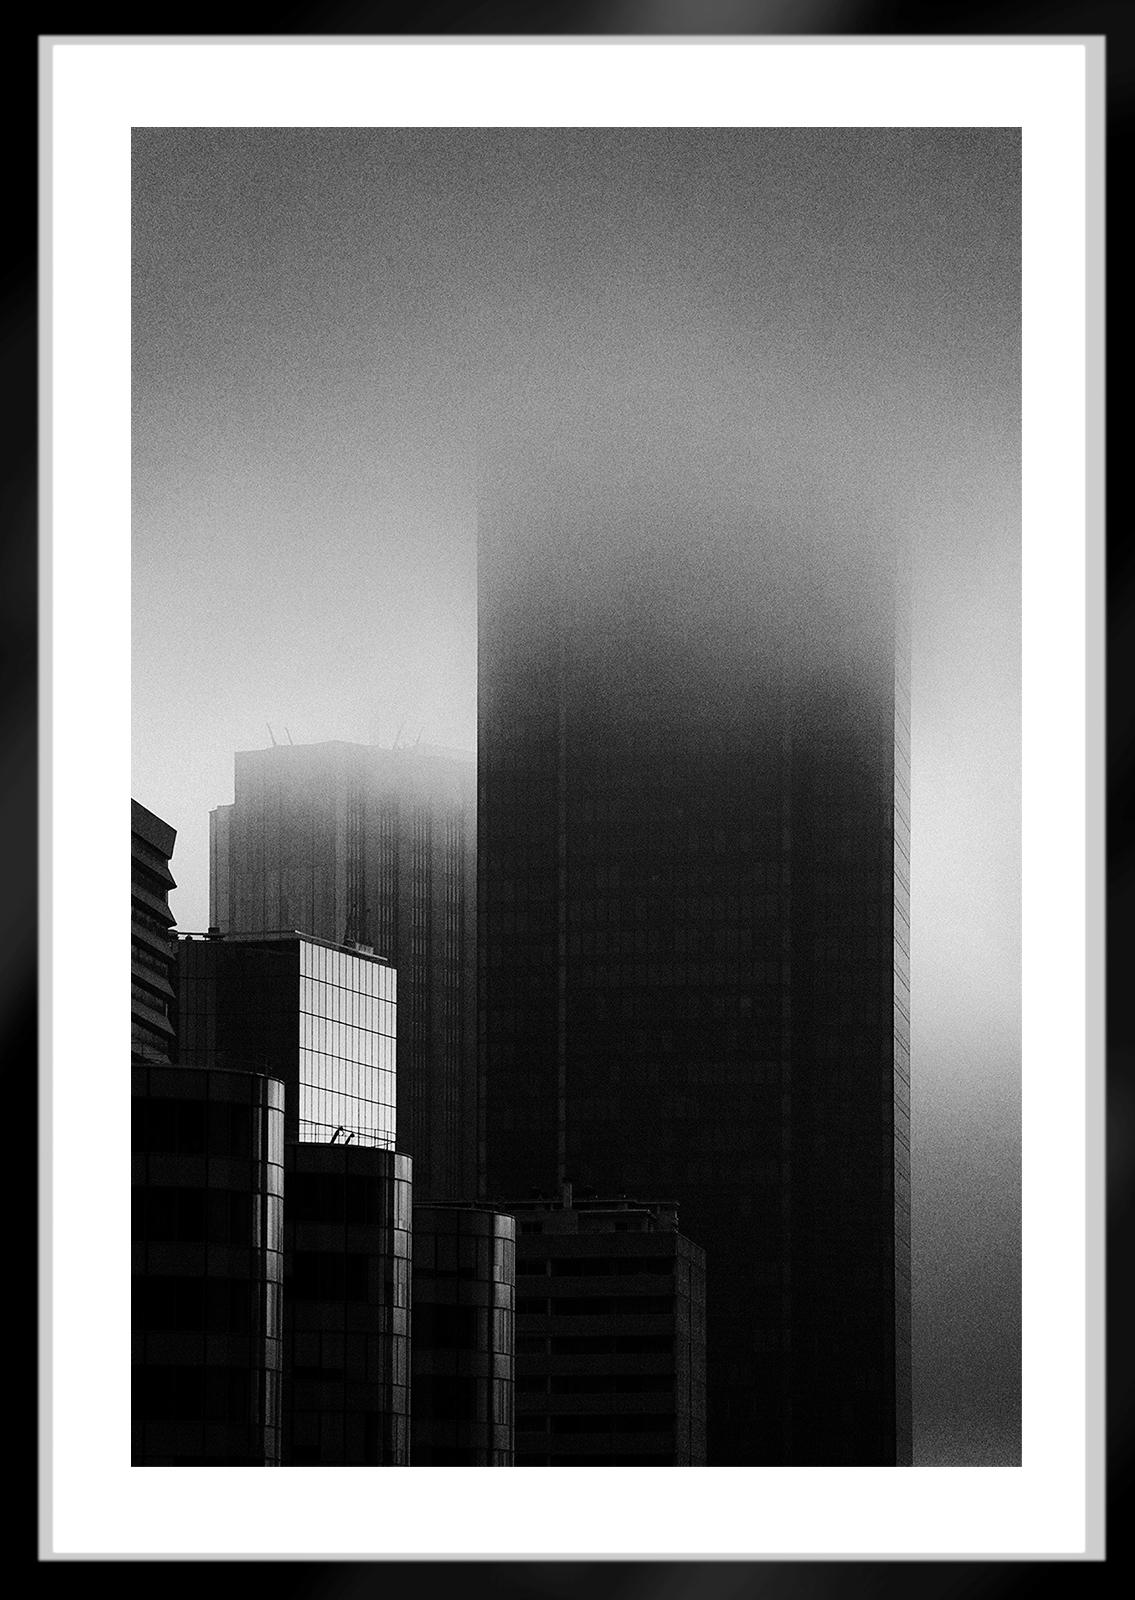  La Défense 1  -  Signed limited edition archival pigment print,  2004   -  Edition of 5

This is an Archival Pigment print on fiber based paper ( Hahnemühle Photo Rag® Baryta 315 gsm , Acid-free and lignin-free paper, Museum quality paper for